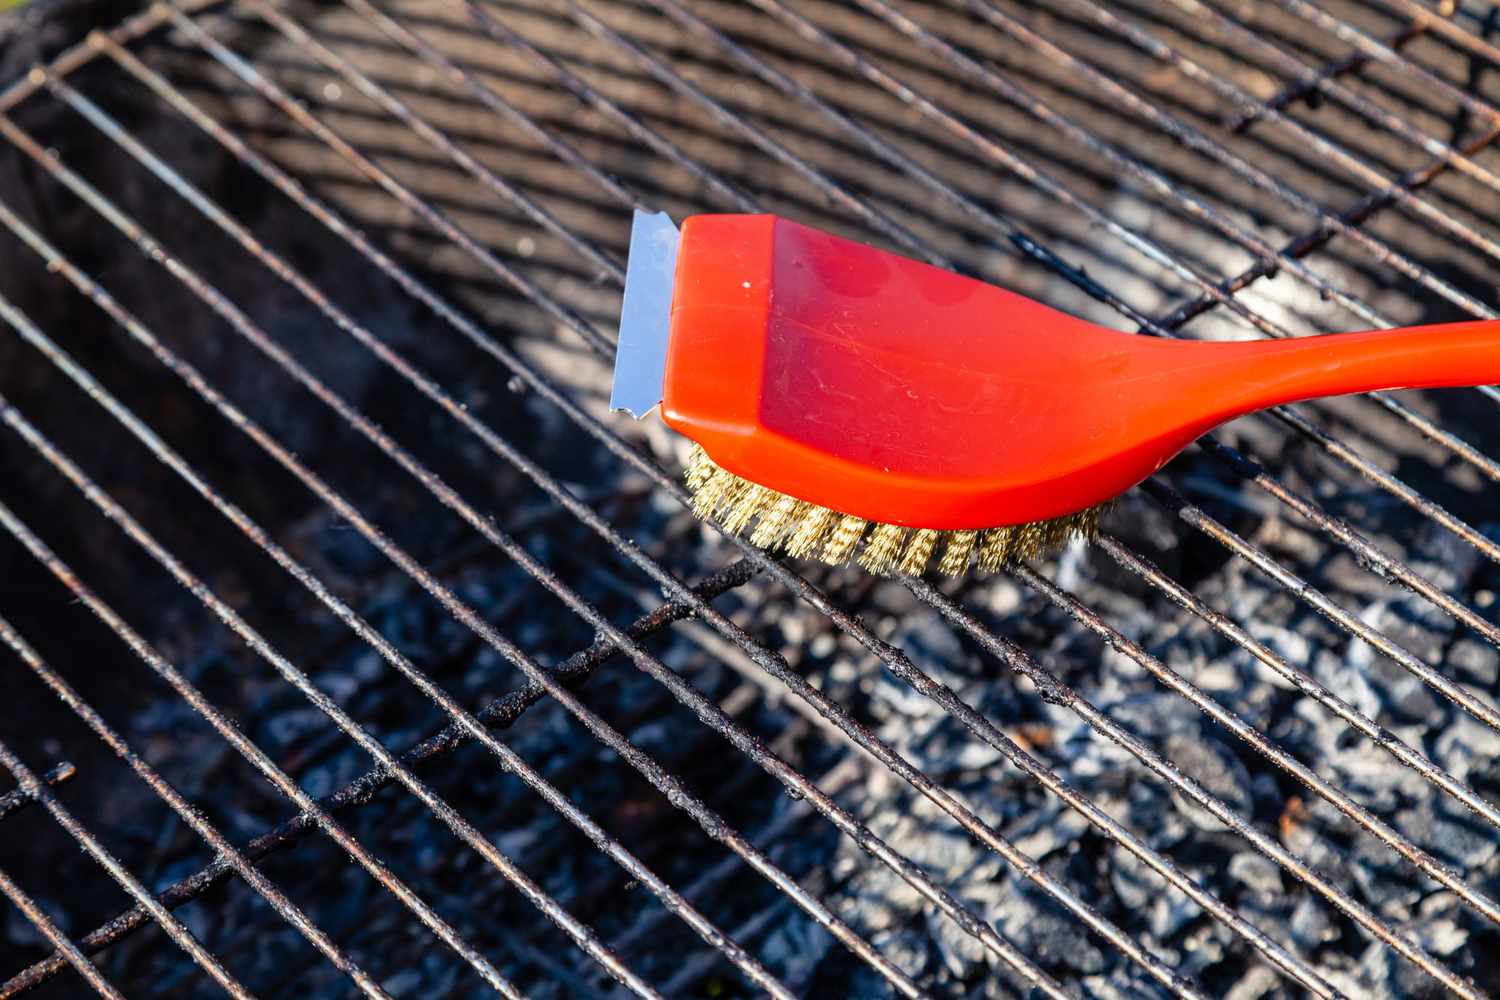 How To Clean A Grill Without A Wire Brush